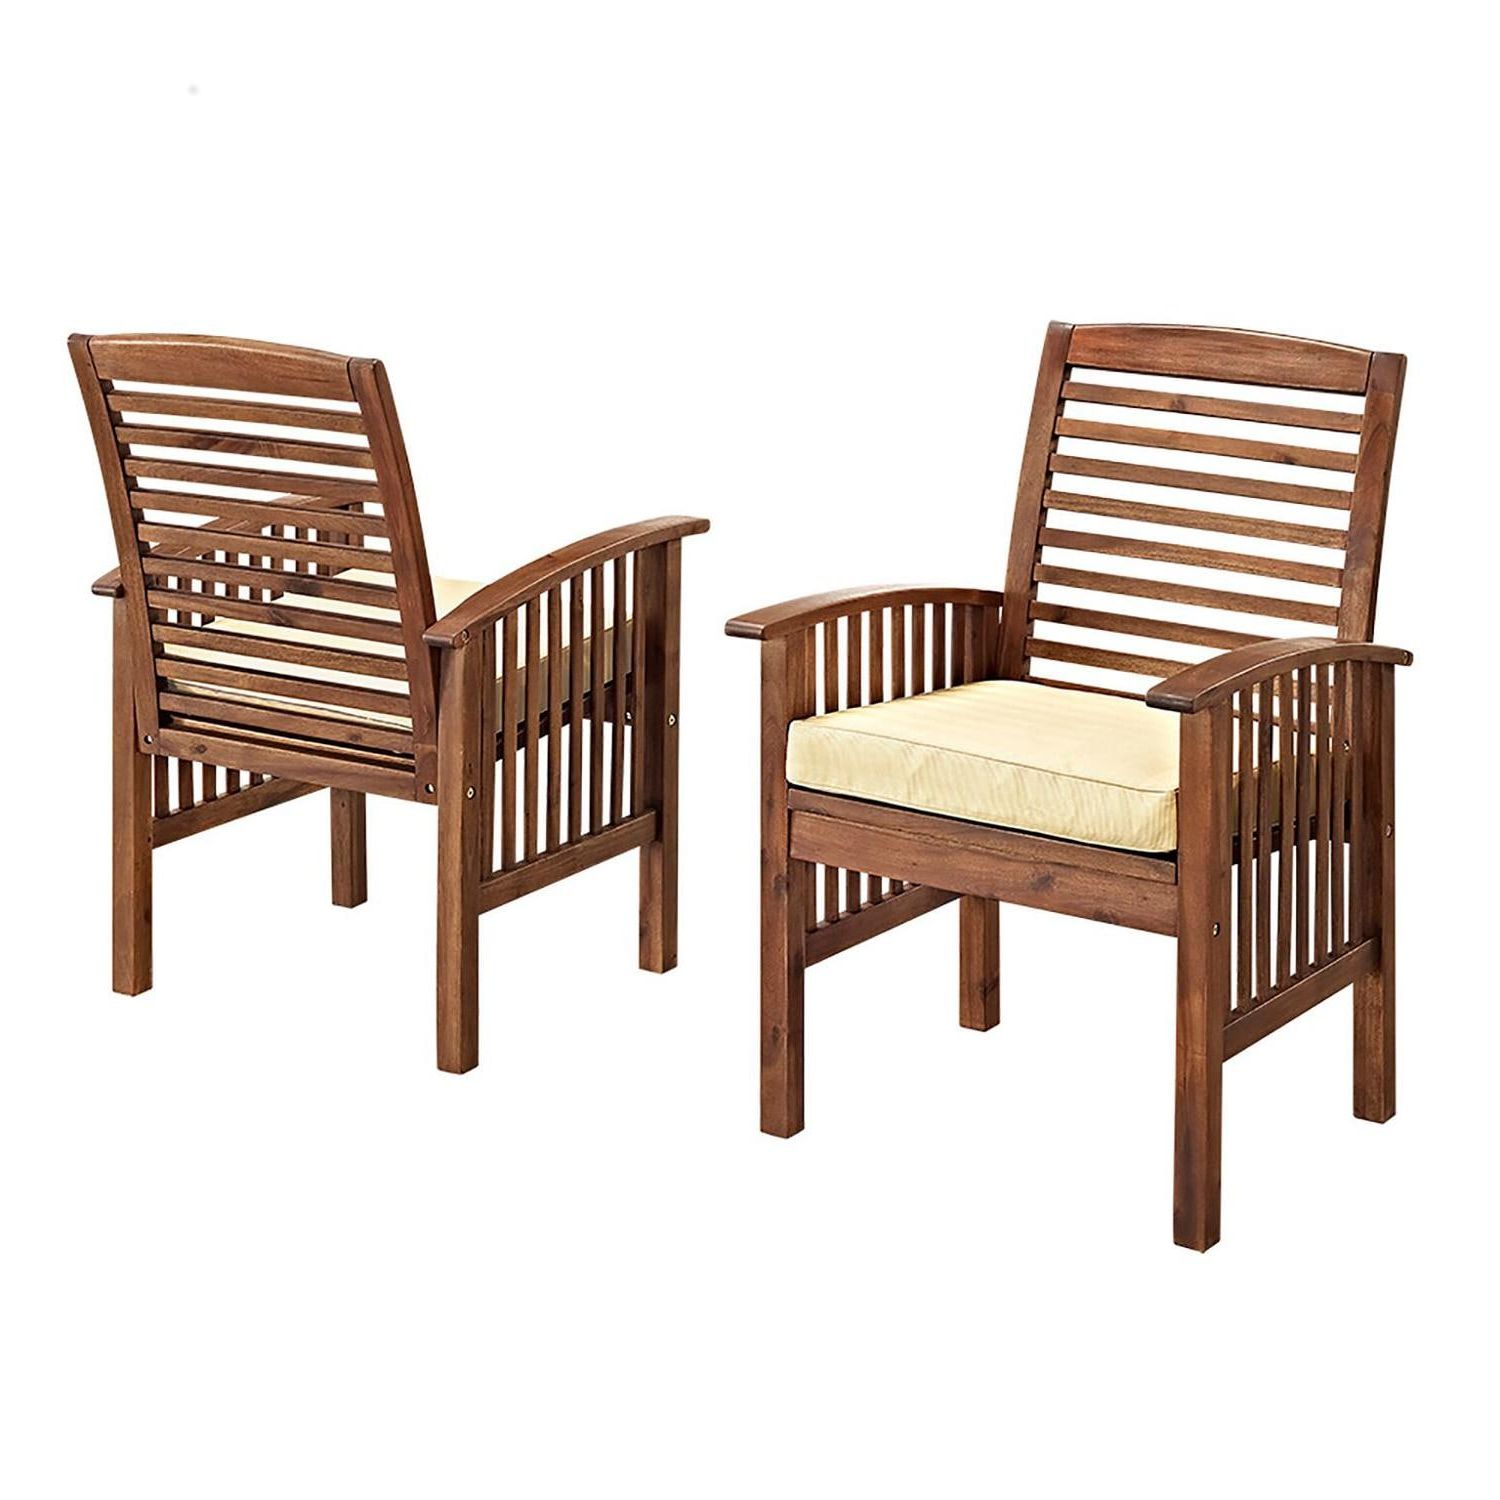 Well Liked Brown Acacia 6 Piece Patio Dining Sets Within Midland 6 Piece Dark Brown Acacia Patio Dining Set W/ 55 X 35 Inch (View 12 of 15)